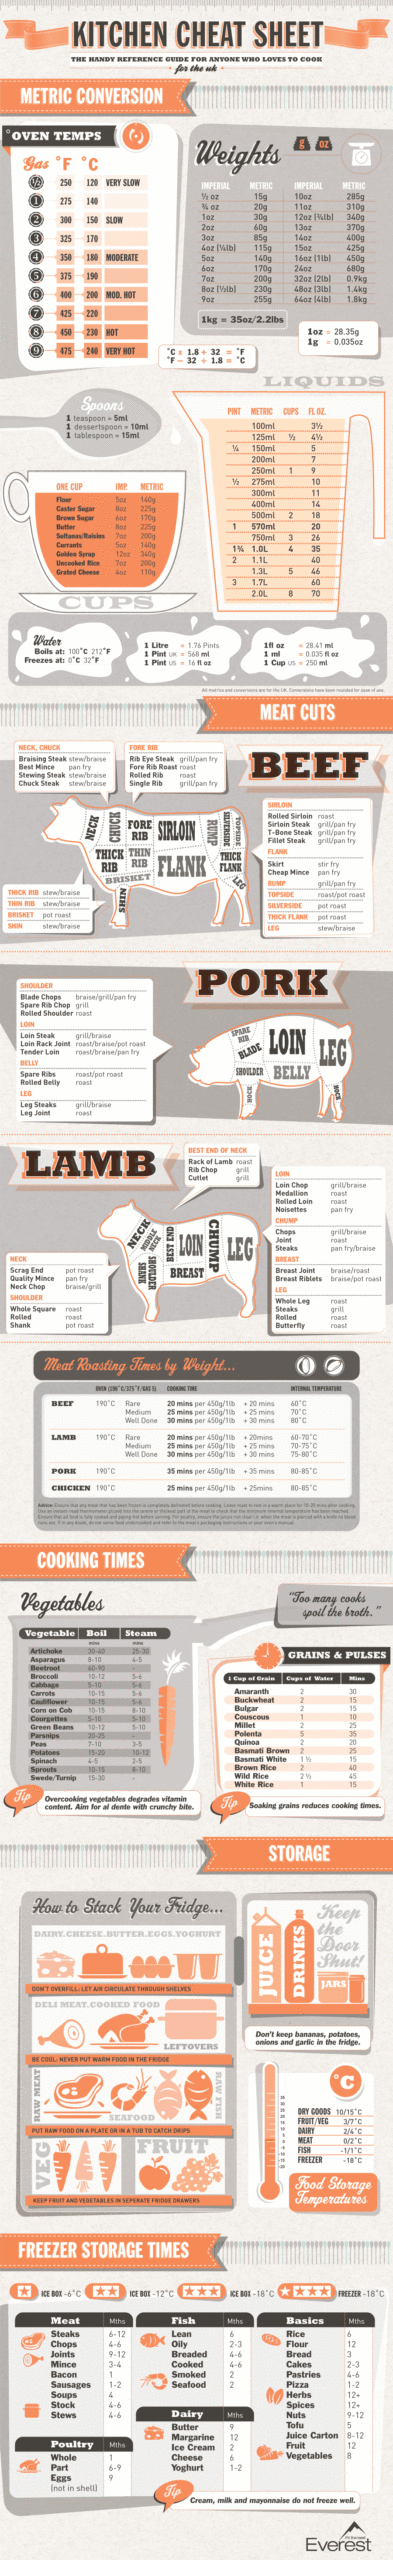 This Kitchen Cheat Sheet Has Weights, Measures And Cuts Of Meat